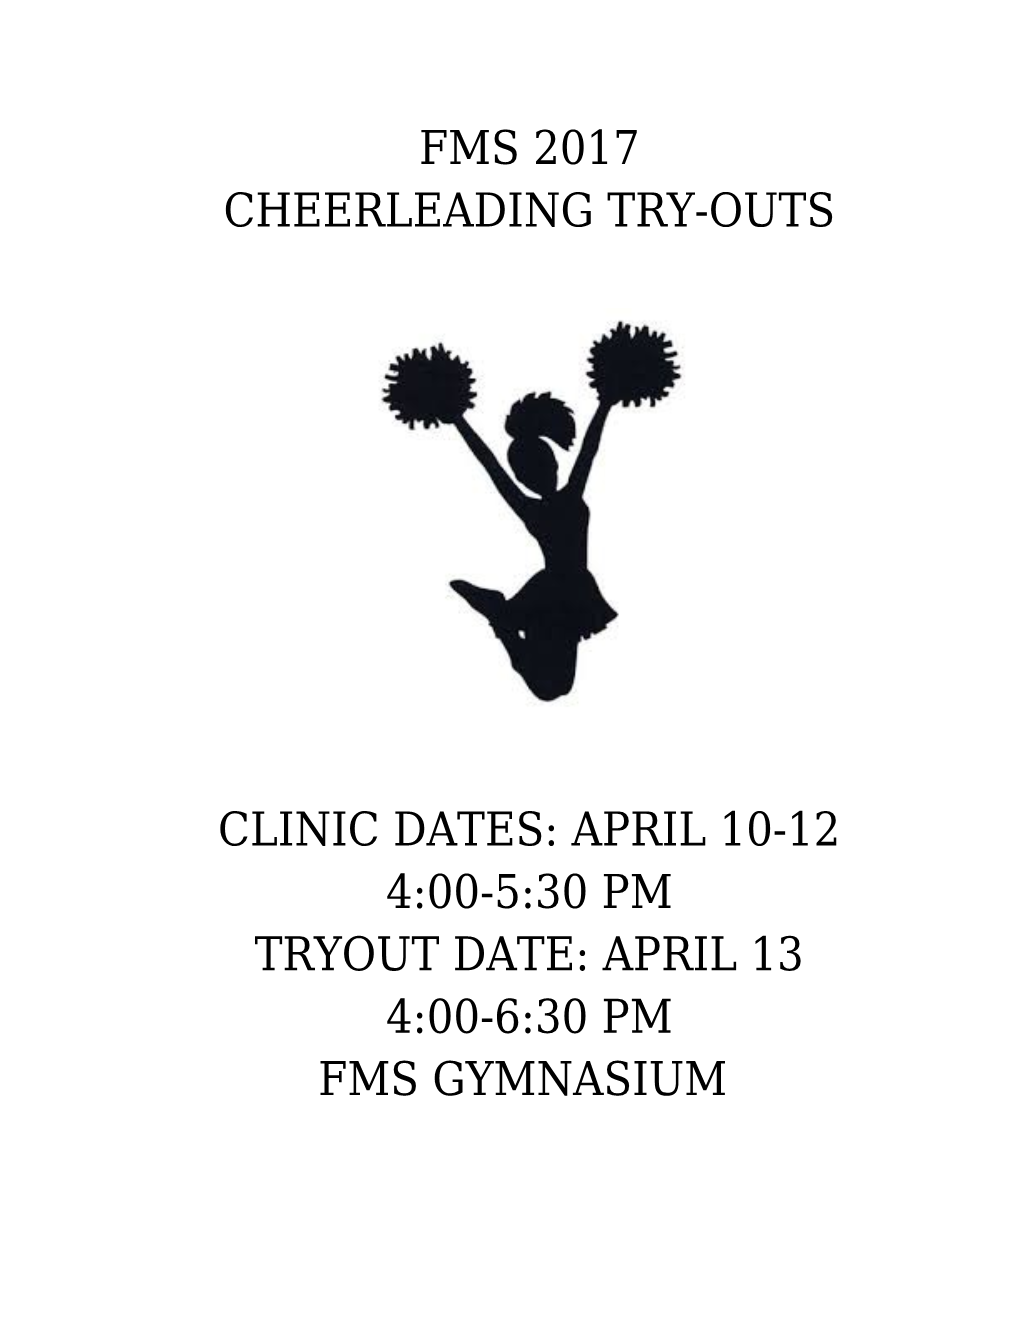 Cheerleading Try-Outs